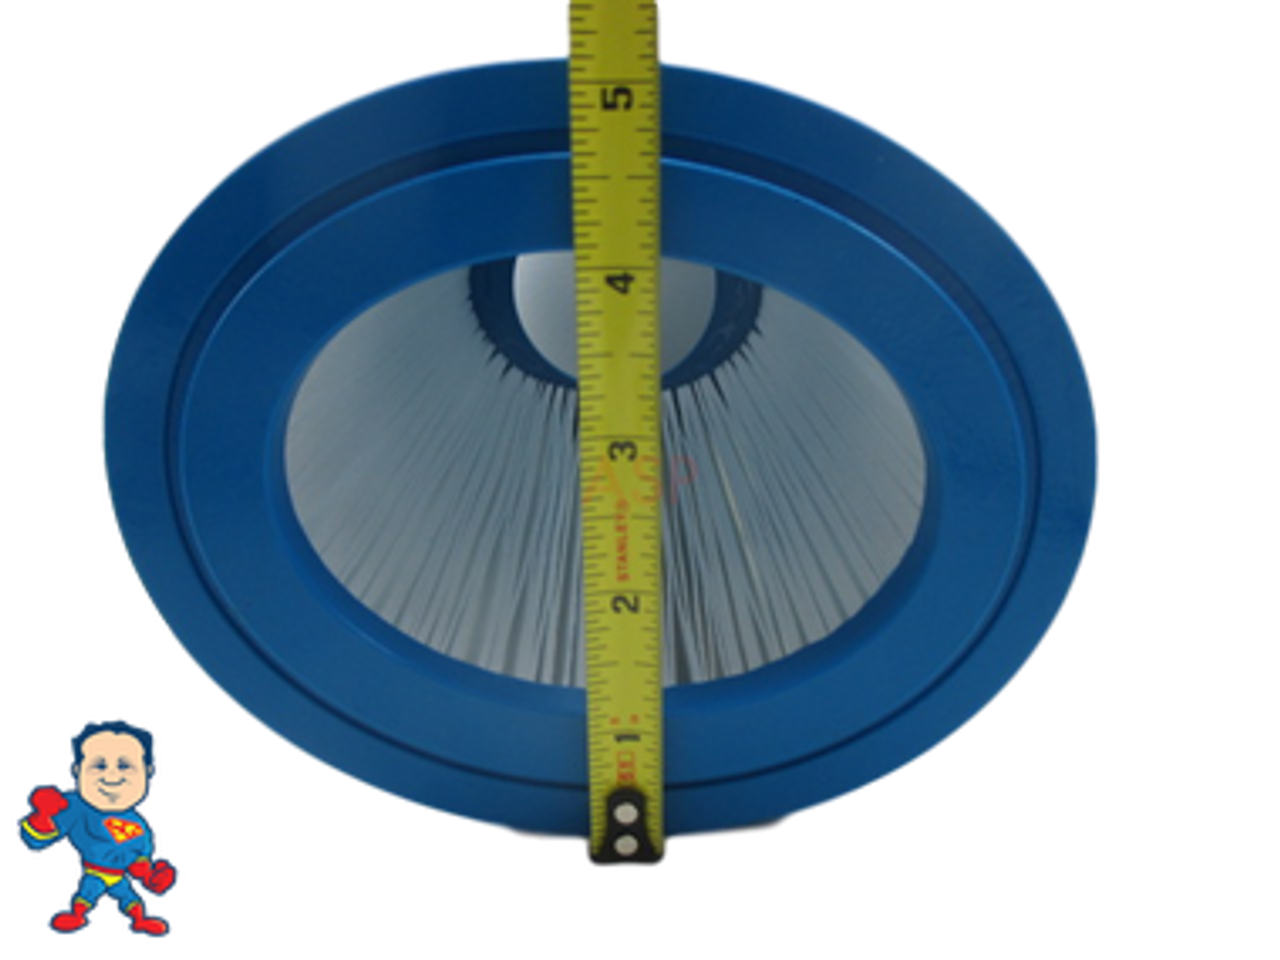 Oval ,Filter, 27 sqft, 9-3/4" Tall X 6-1/4" Wide at Widest Part of Oval (1) 3" Hole and (1) 4 1/8" Oval Hole Fits Dream Maker Spas